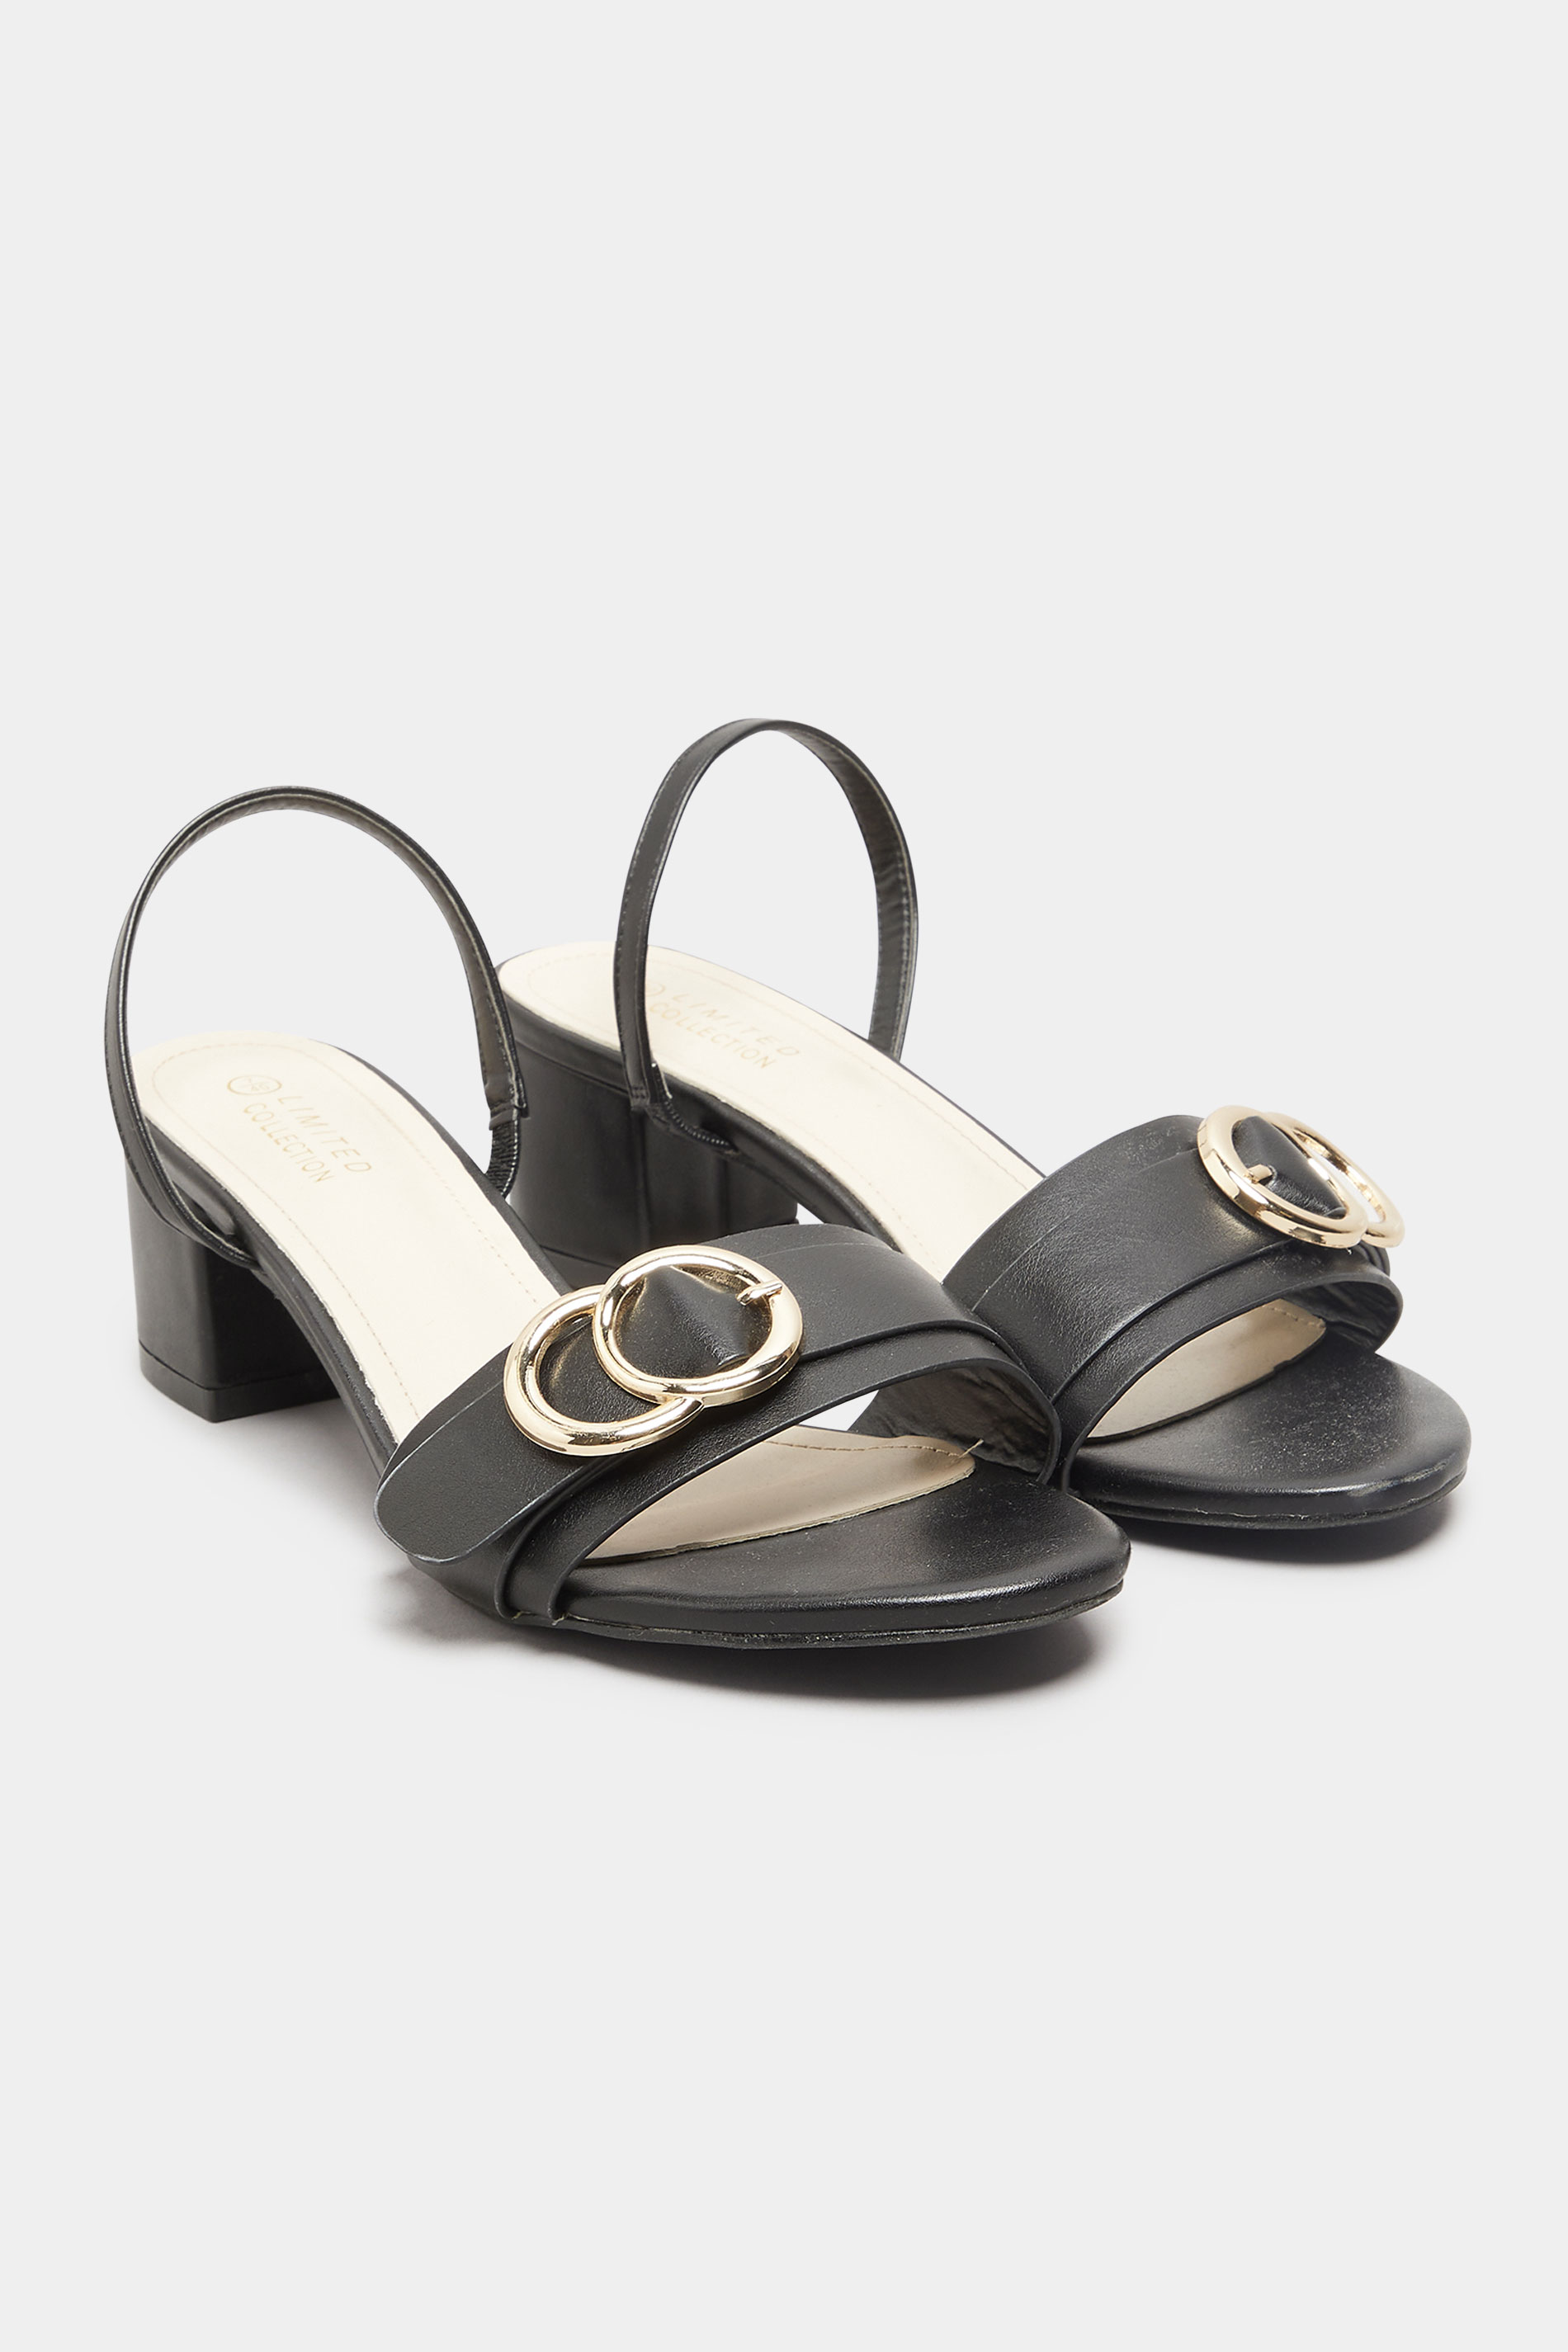 LIMITED COLLECTION Black Buckle Slingback Block Heeled Sandal In Wide EE Fit_A.jpg